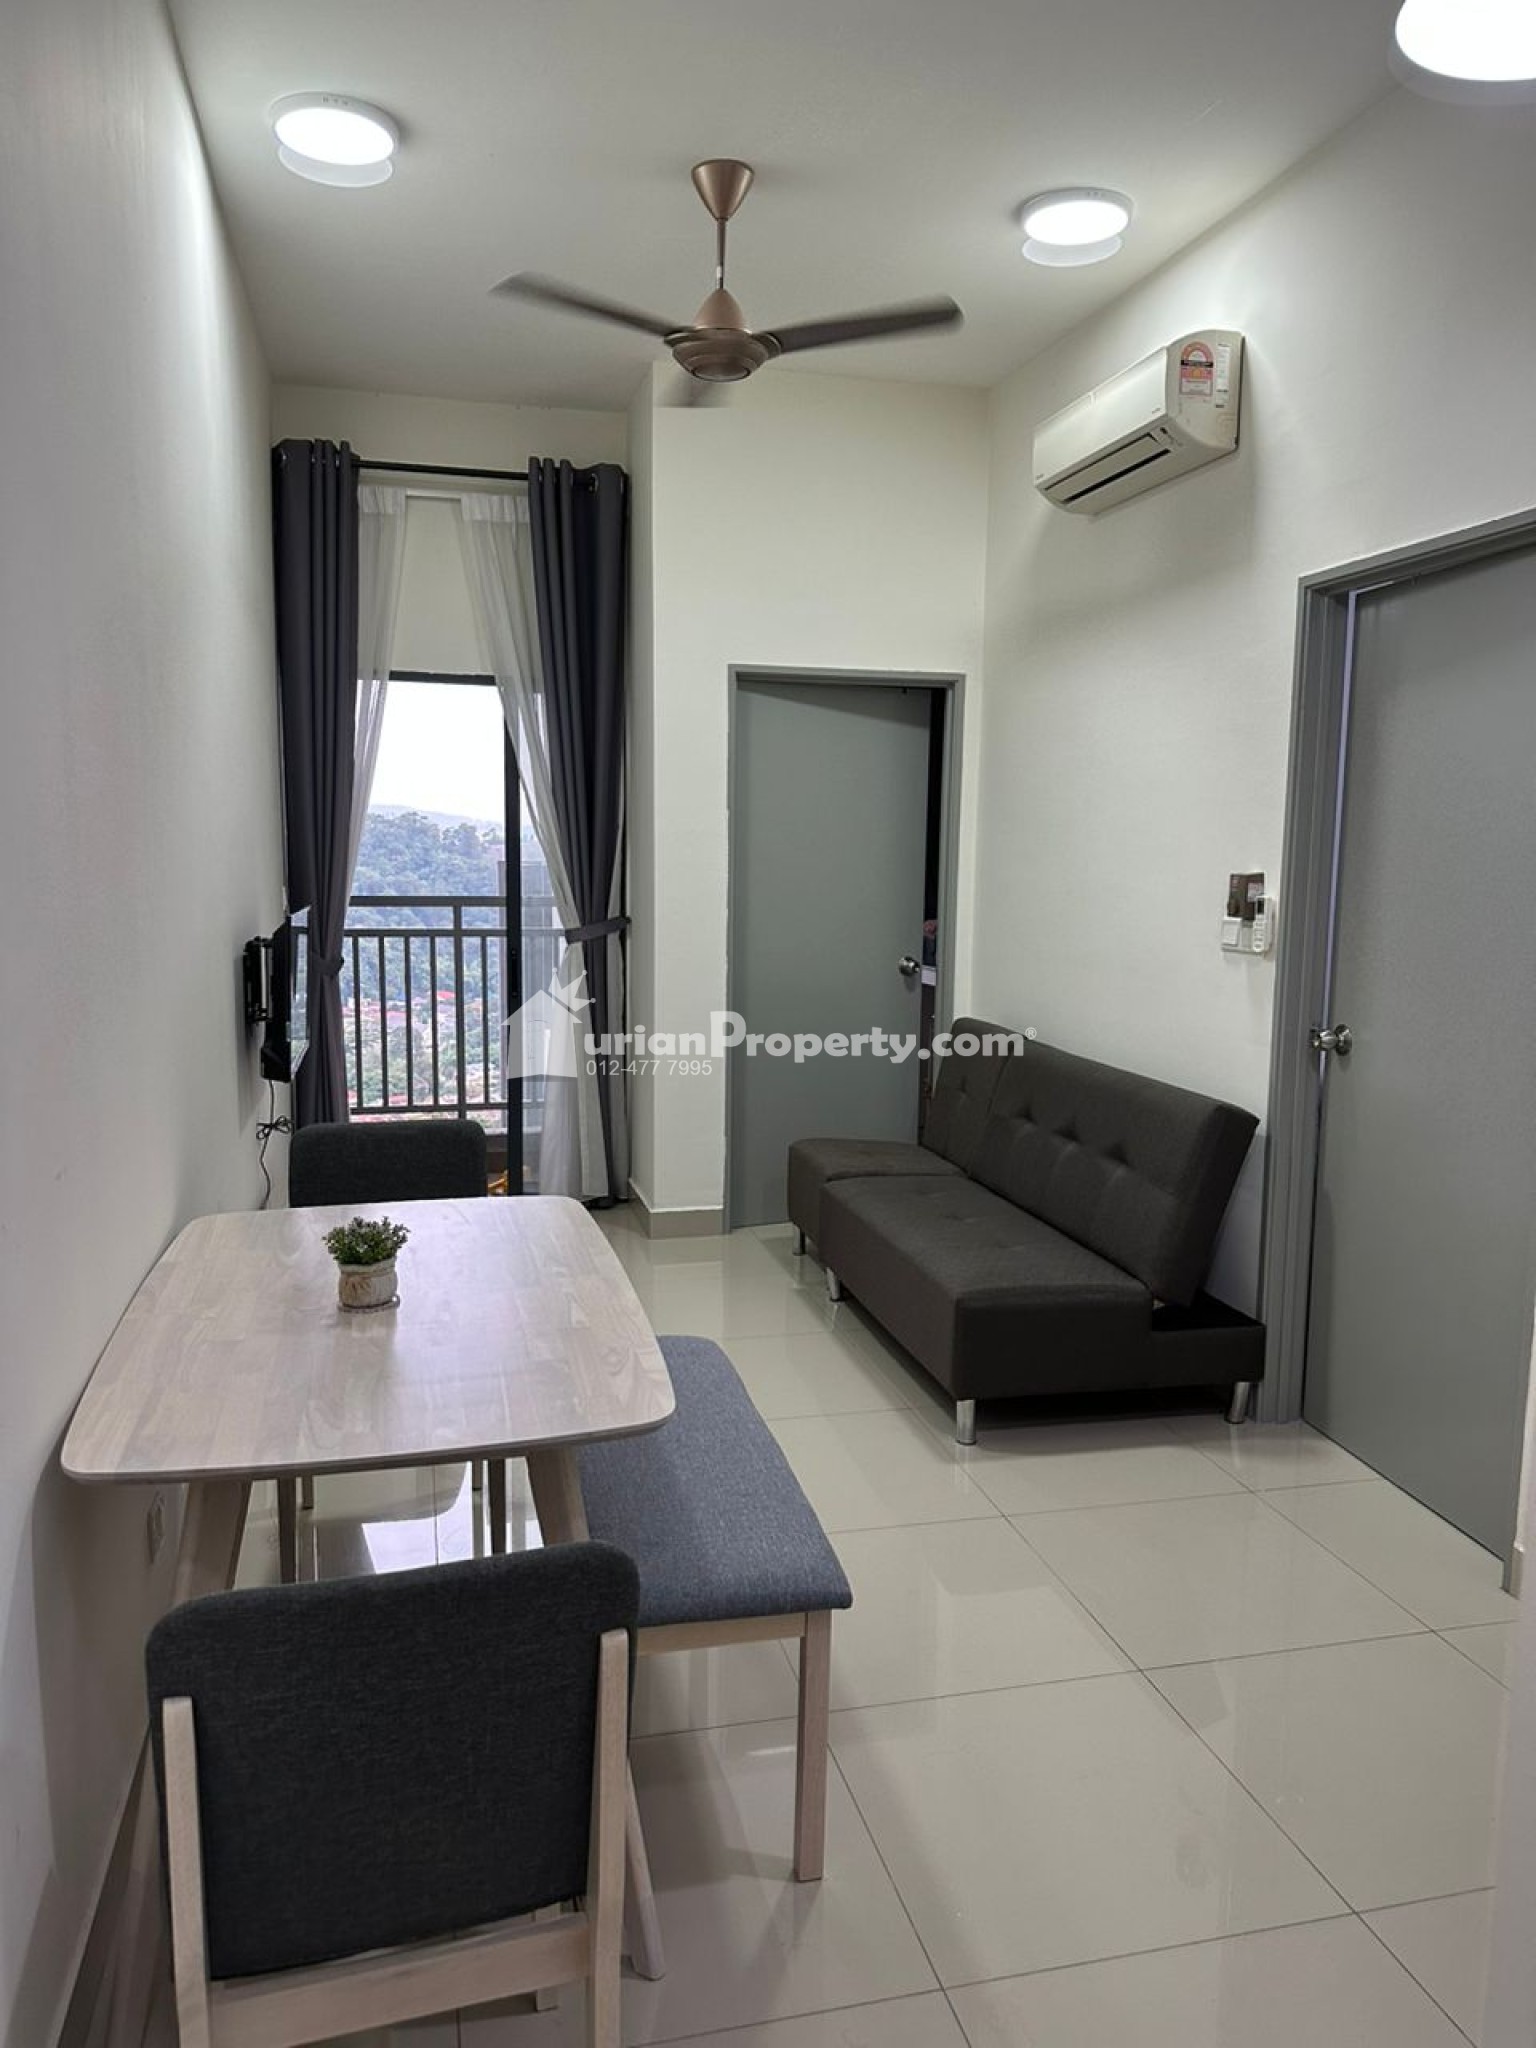 Condo For Rent at Ayuman Suites